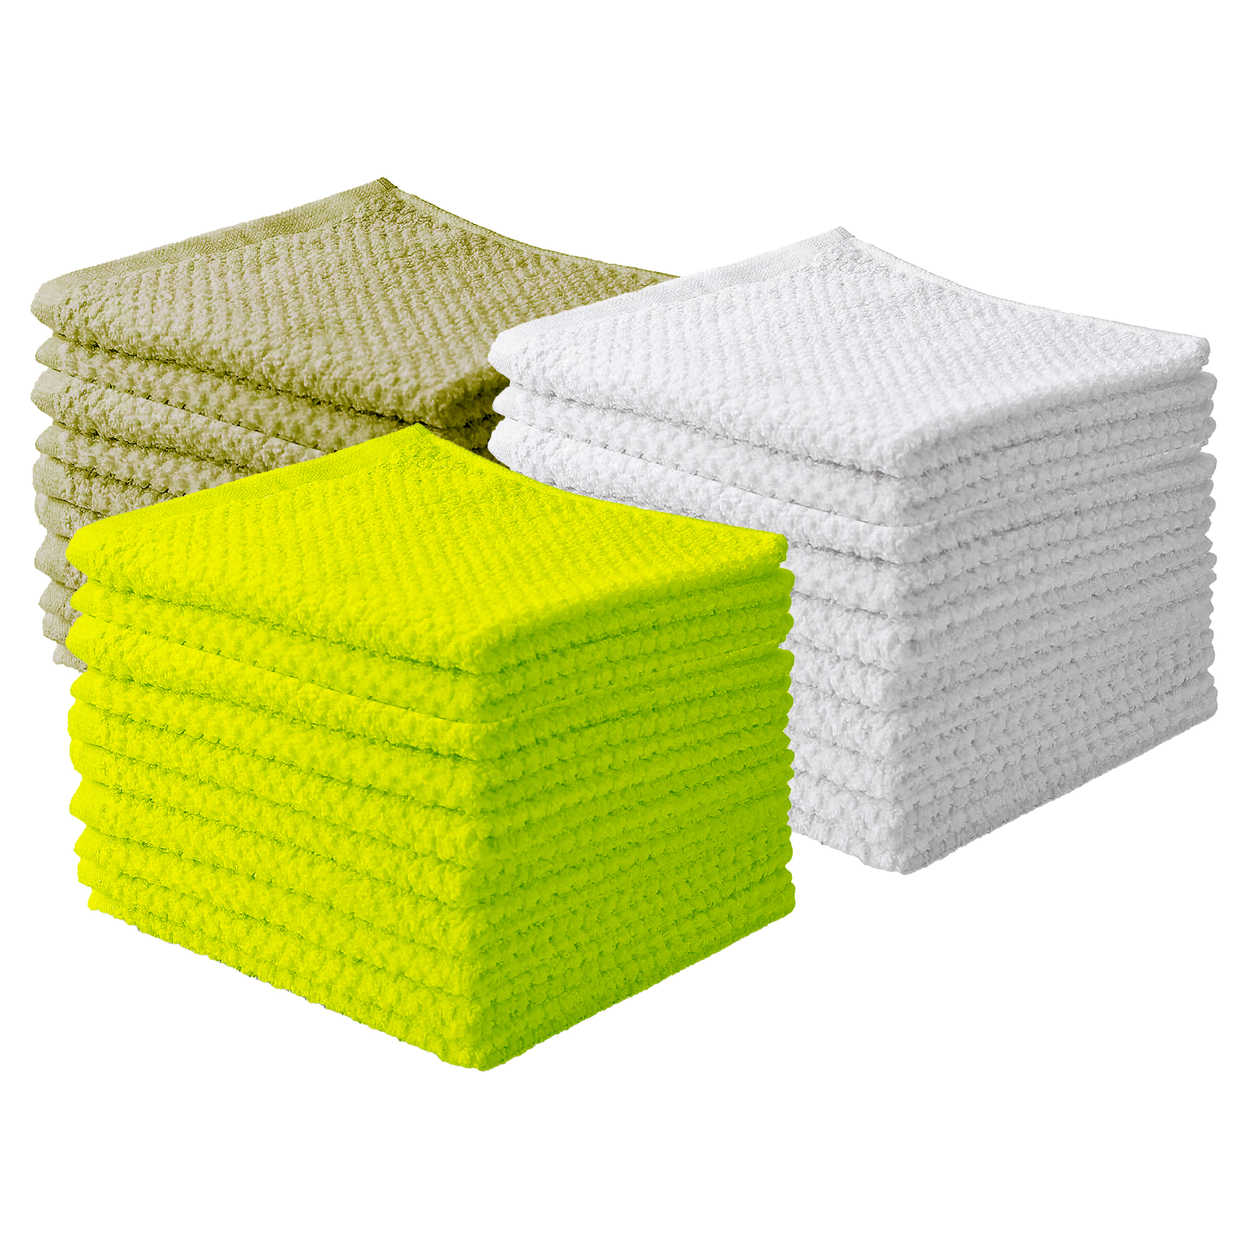 Multi-Pack: Multipurpose Super Absorbent Ultra Soft 100% Cotton Ring Spun Stitched Wash Cloths - 20-pack